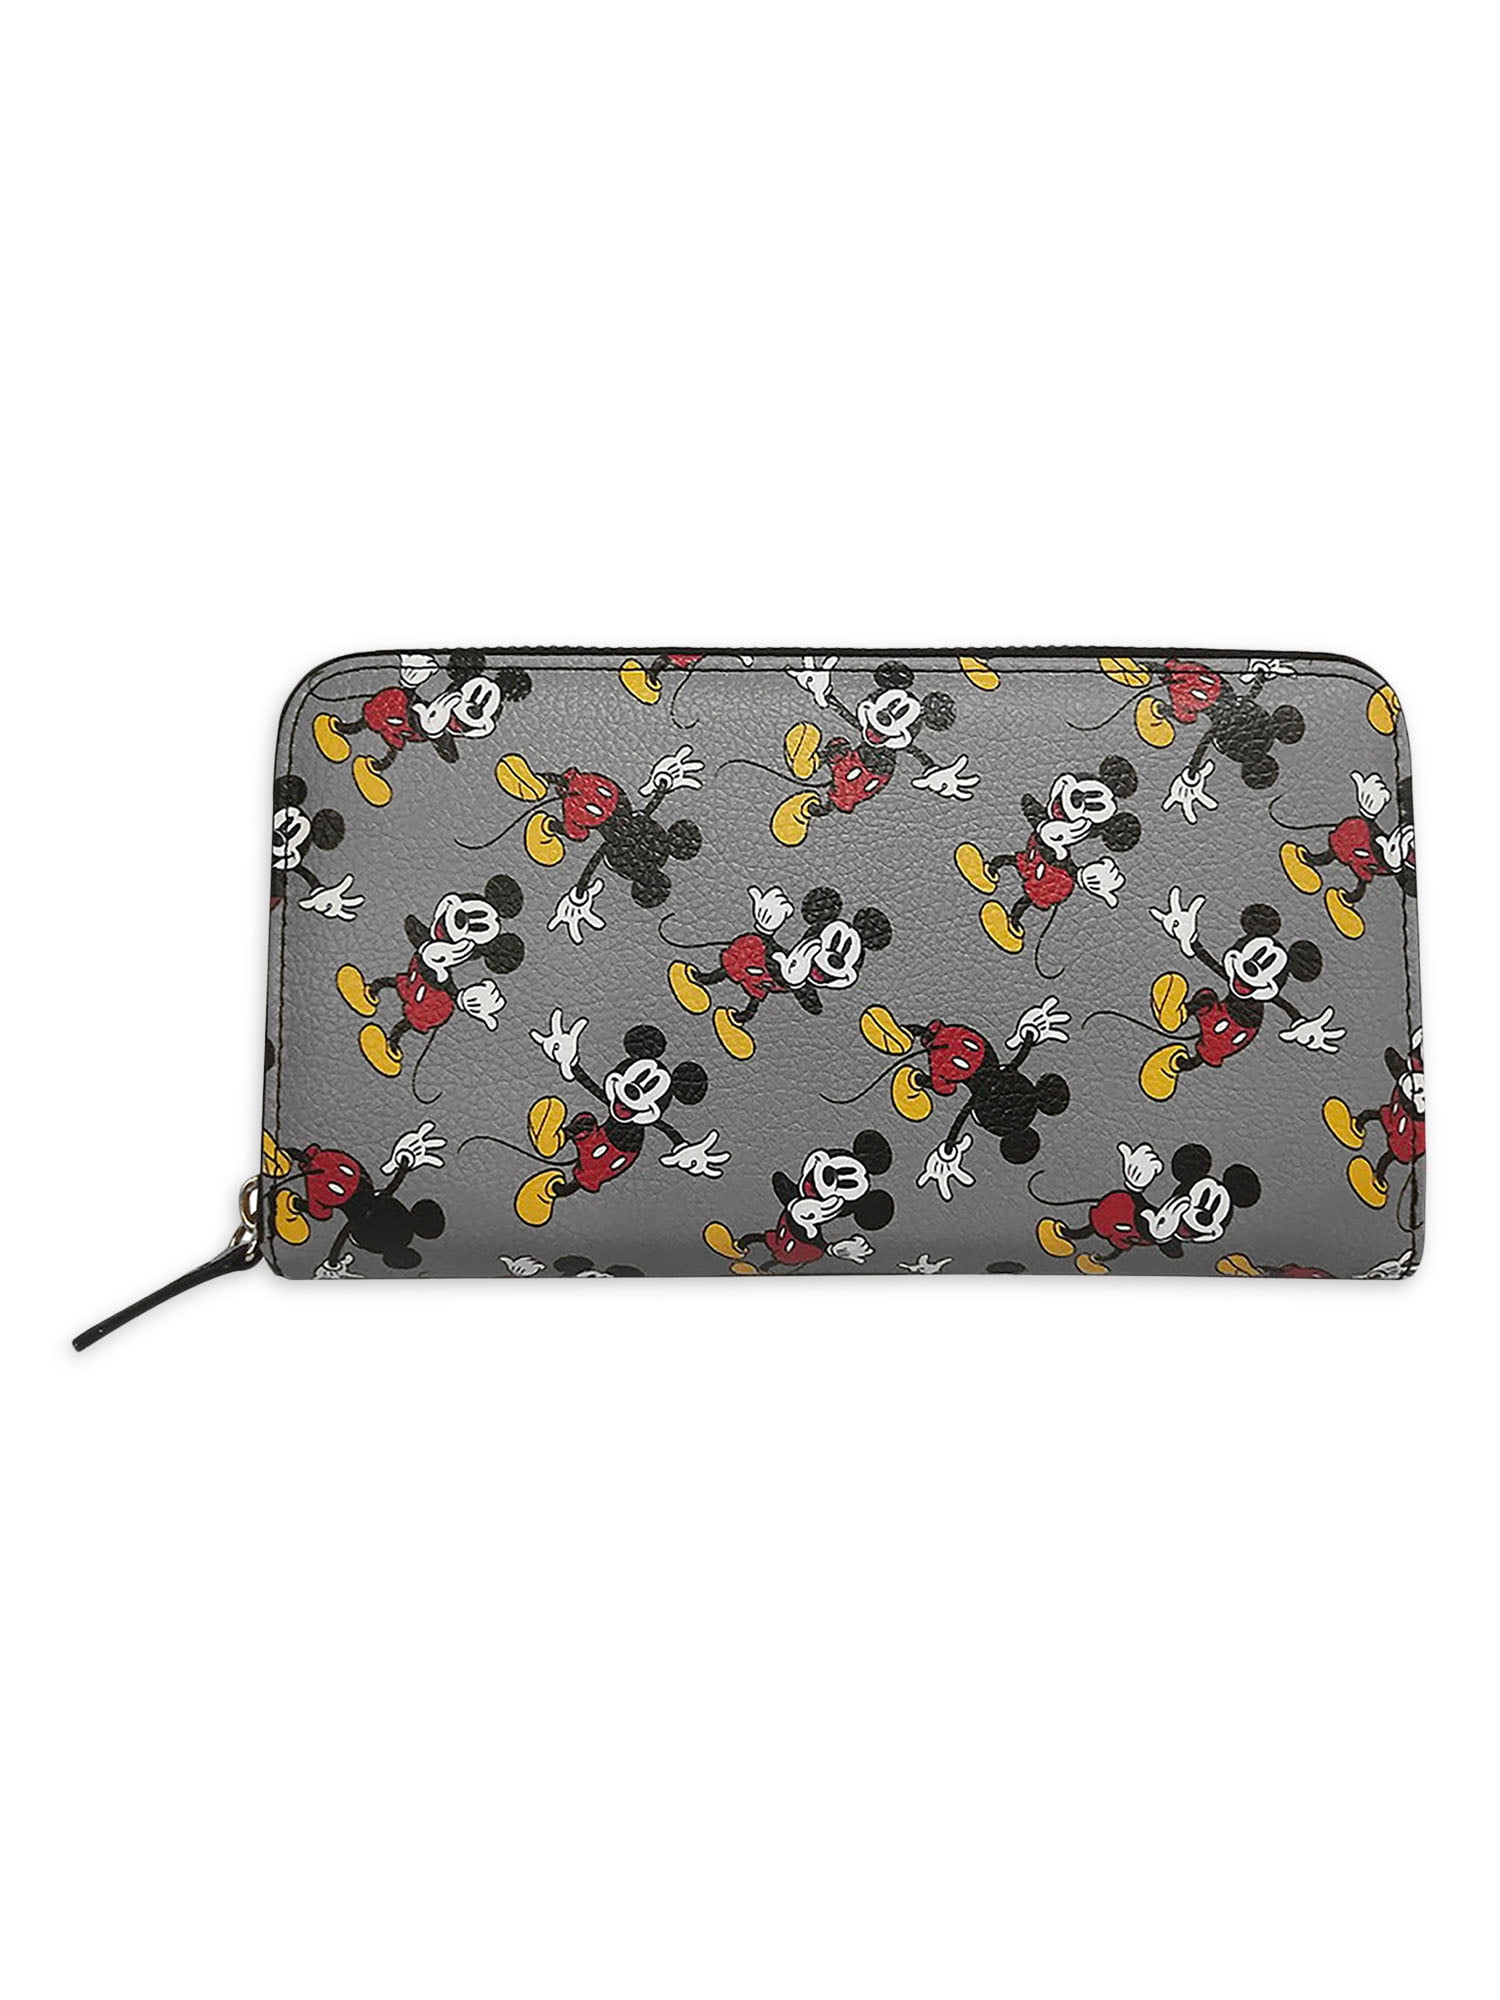 Cartoon Mickey Mouse Women And Girls Cute Fashion Canvas Coin Purse,Wallet Bag Change Pouch,With Zipper Multi-Functional Cellphone Bag With Handle 